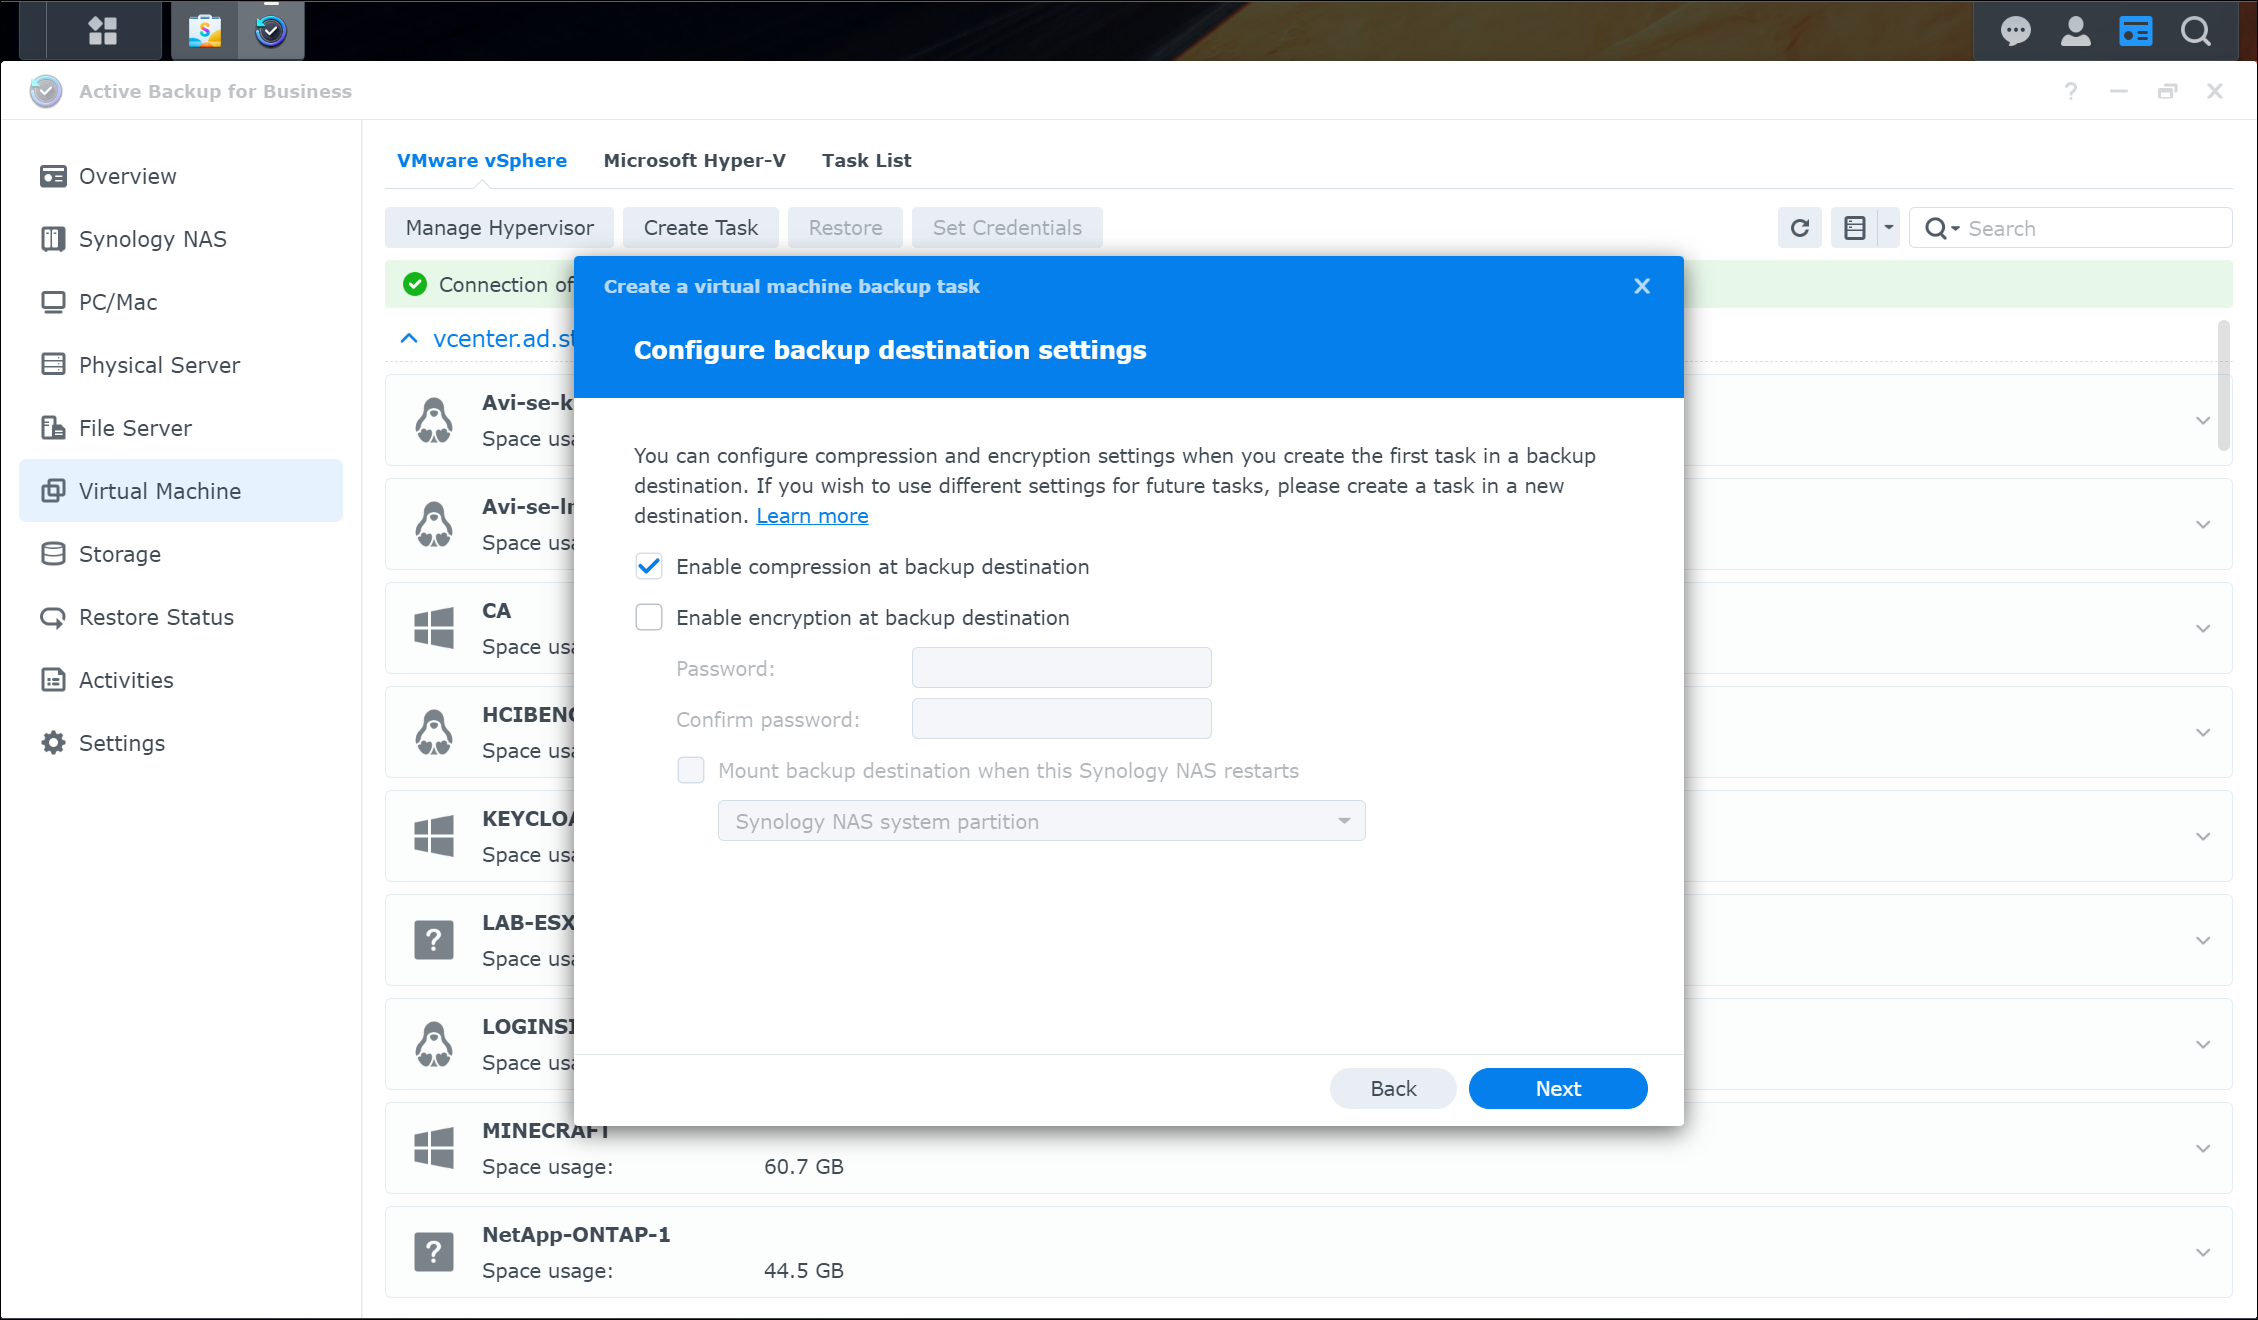 Screenshot of Synology Active Backup for Business Showing the Available Backup Destination Settings